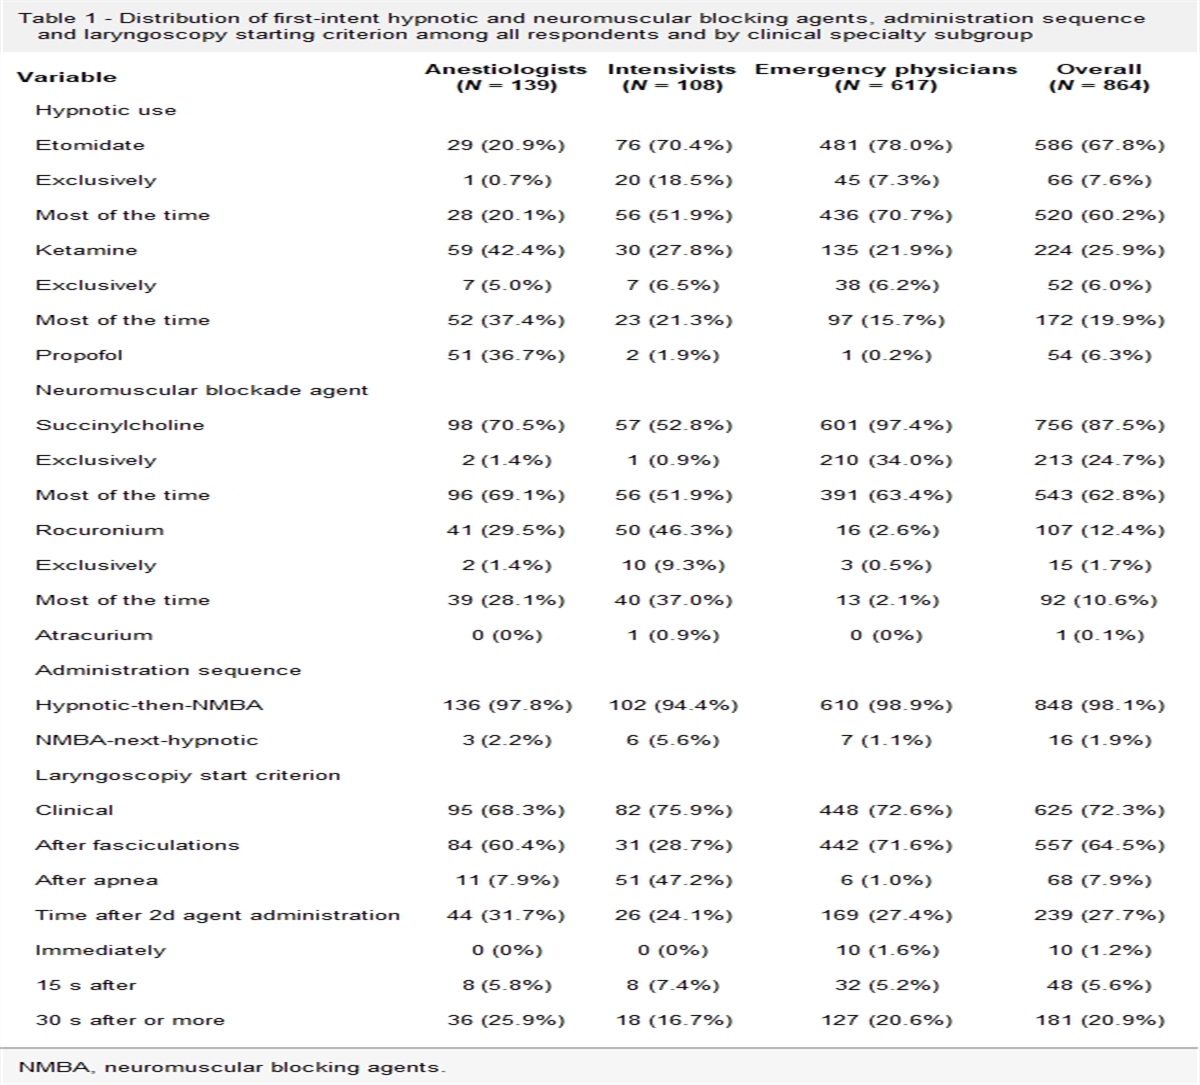 Sequence of administration of anesthetic agents during rapid sequence induction for emergency intubation: a French survey on current practices